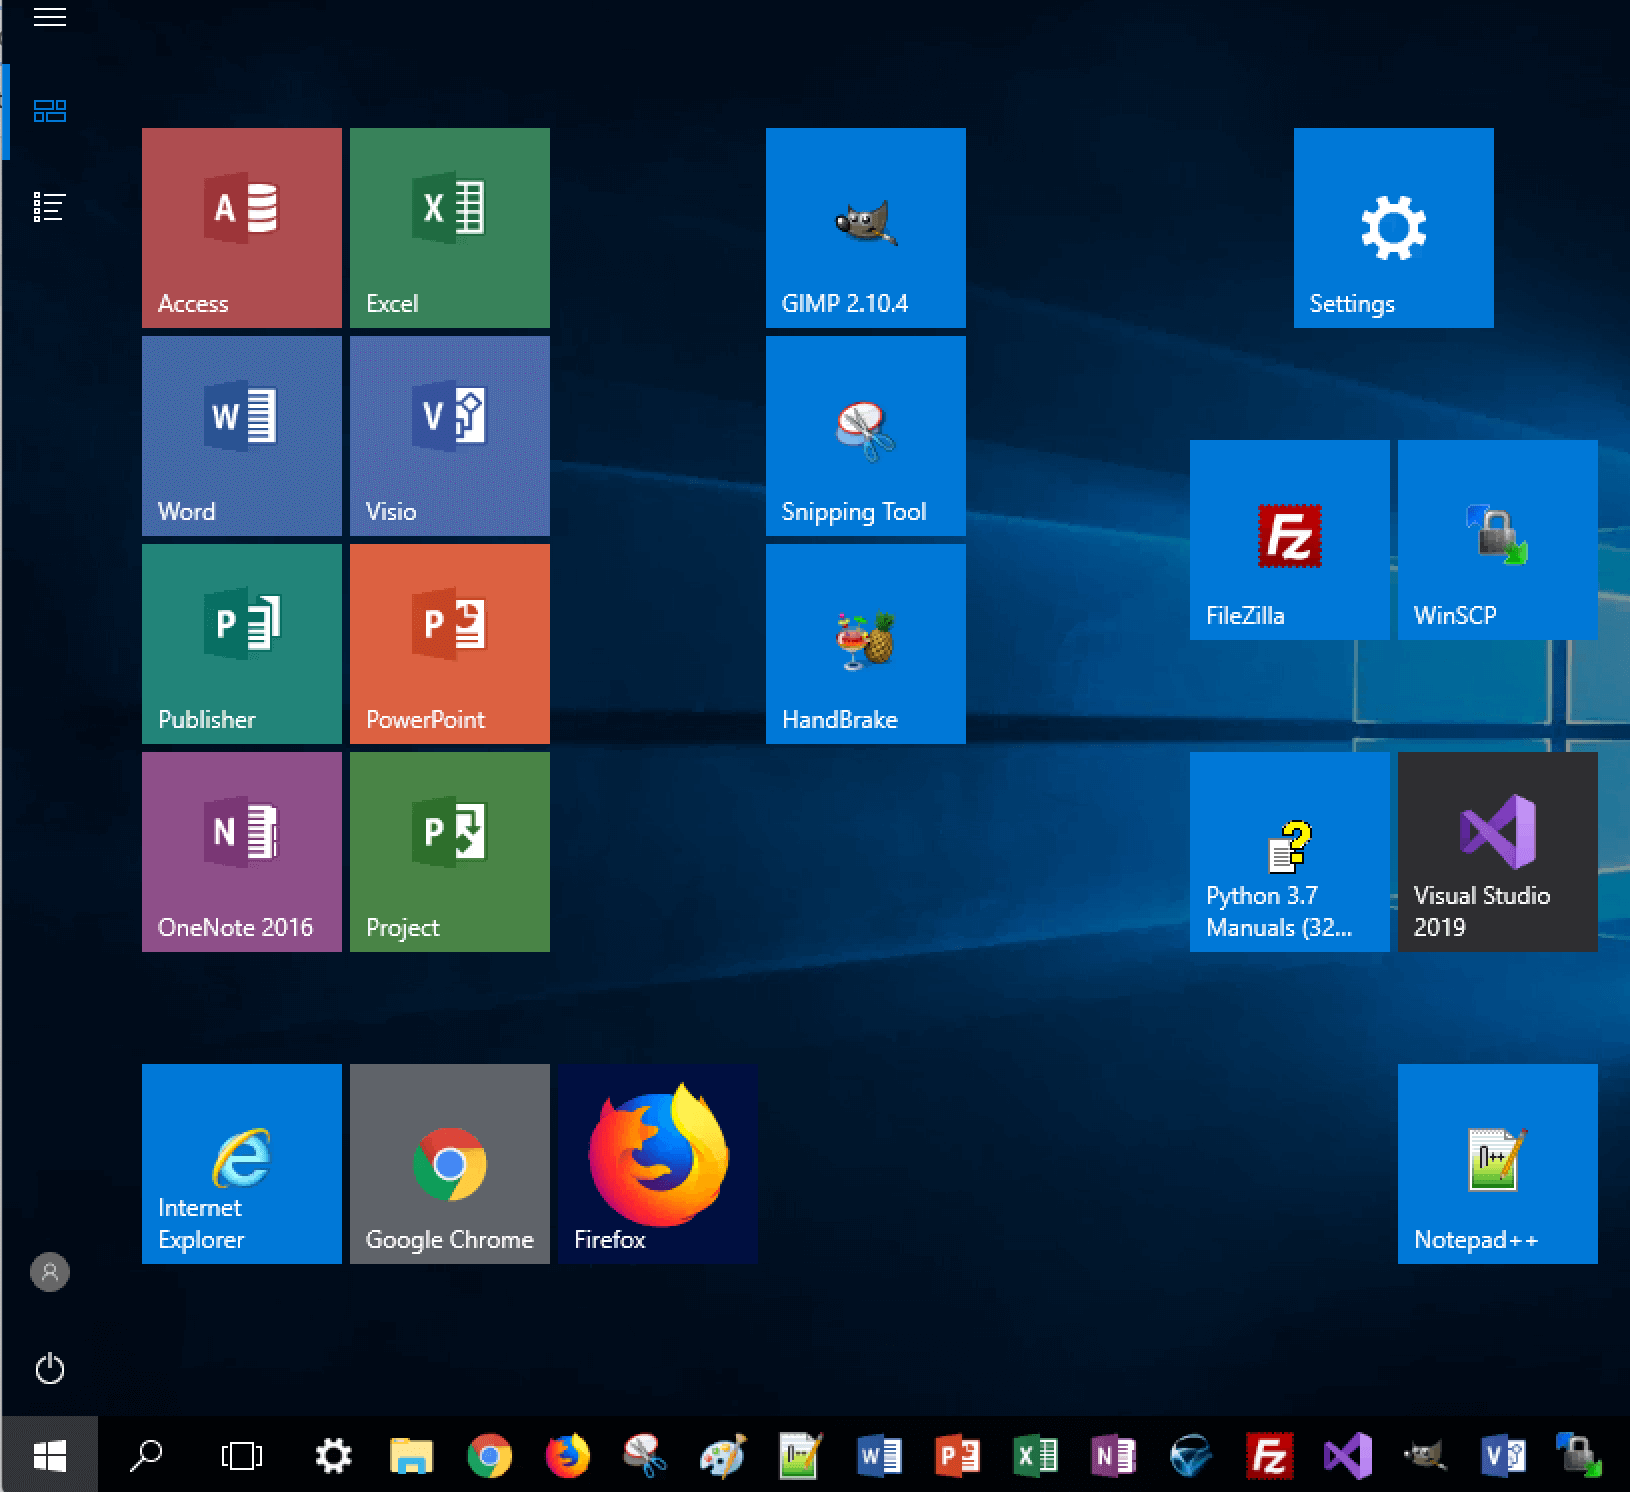 Finished view of the tiles and taskbar arranged by personal prefernence